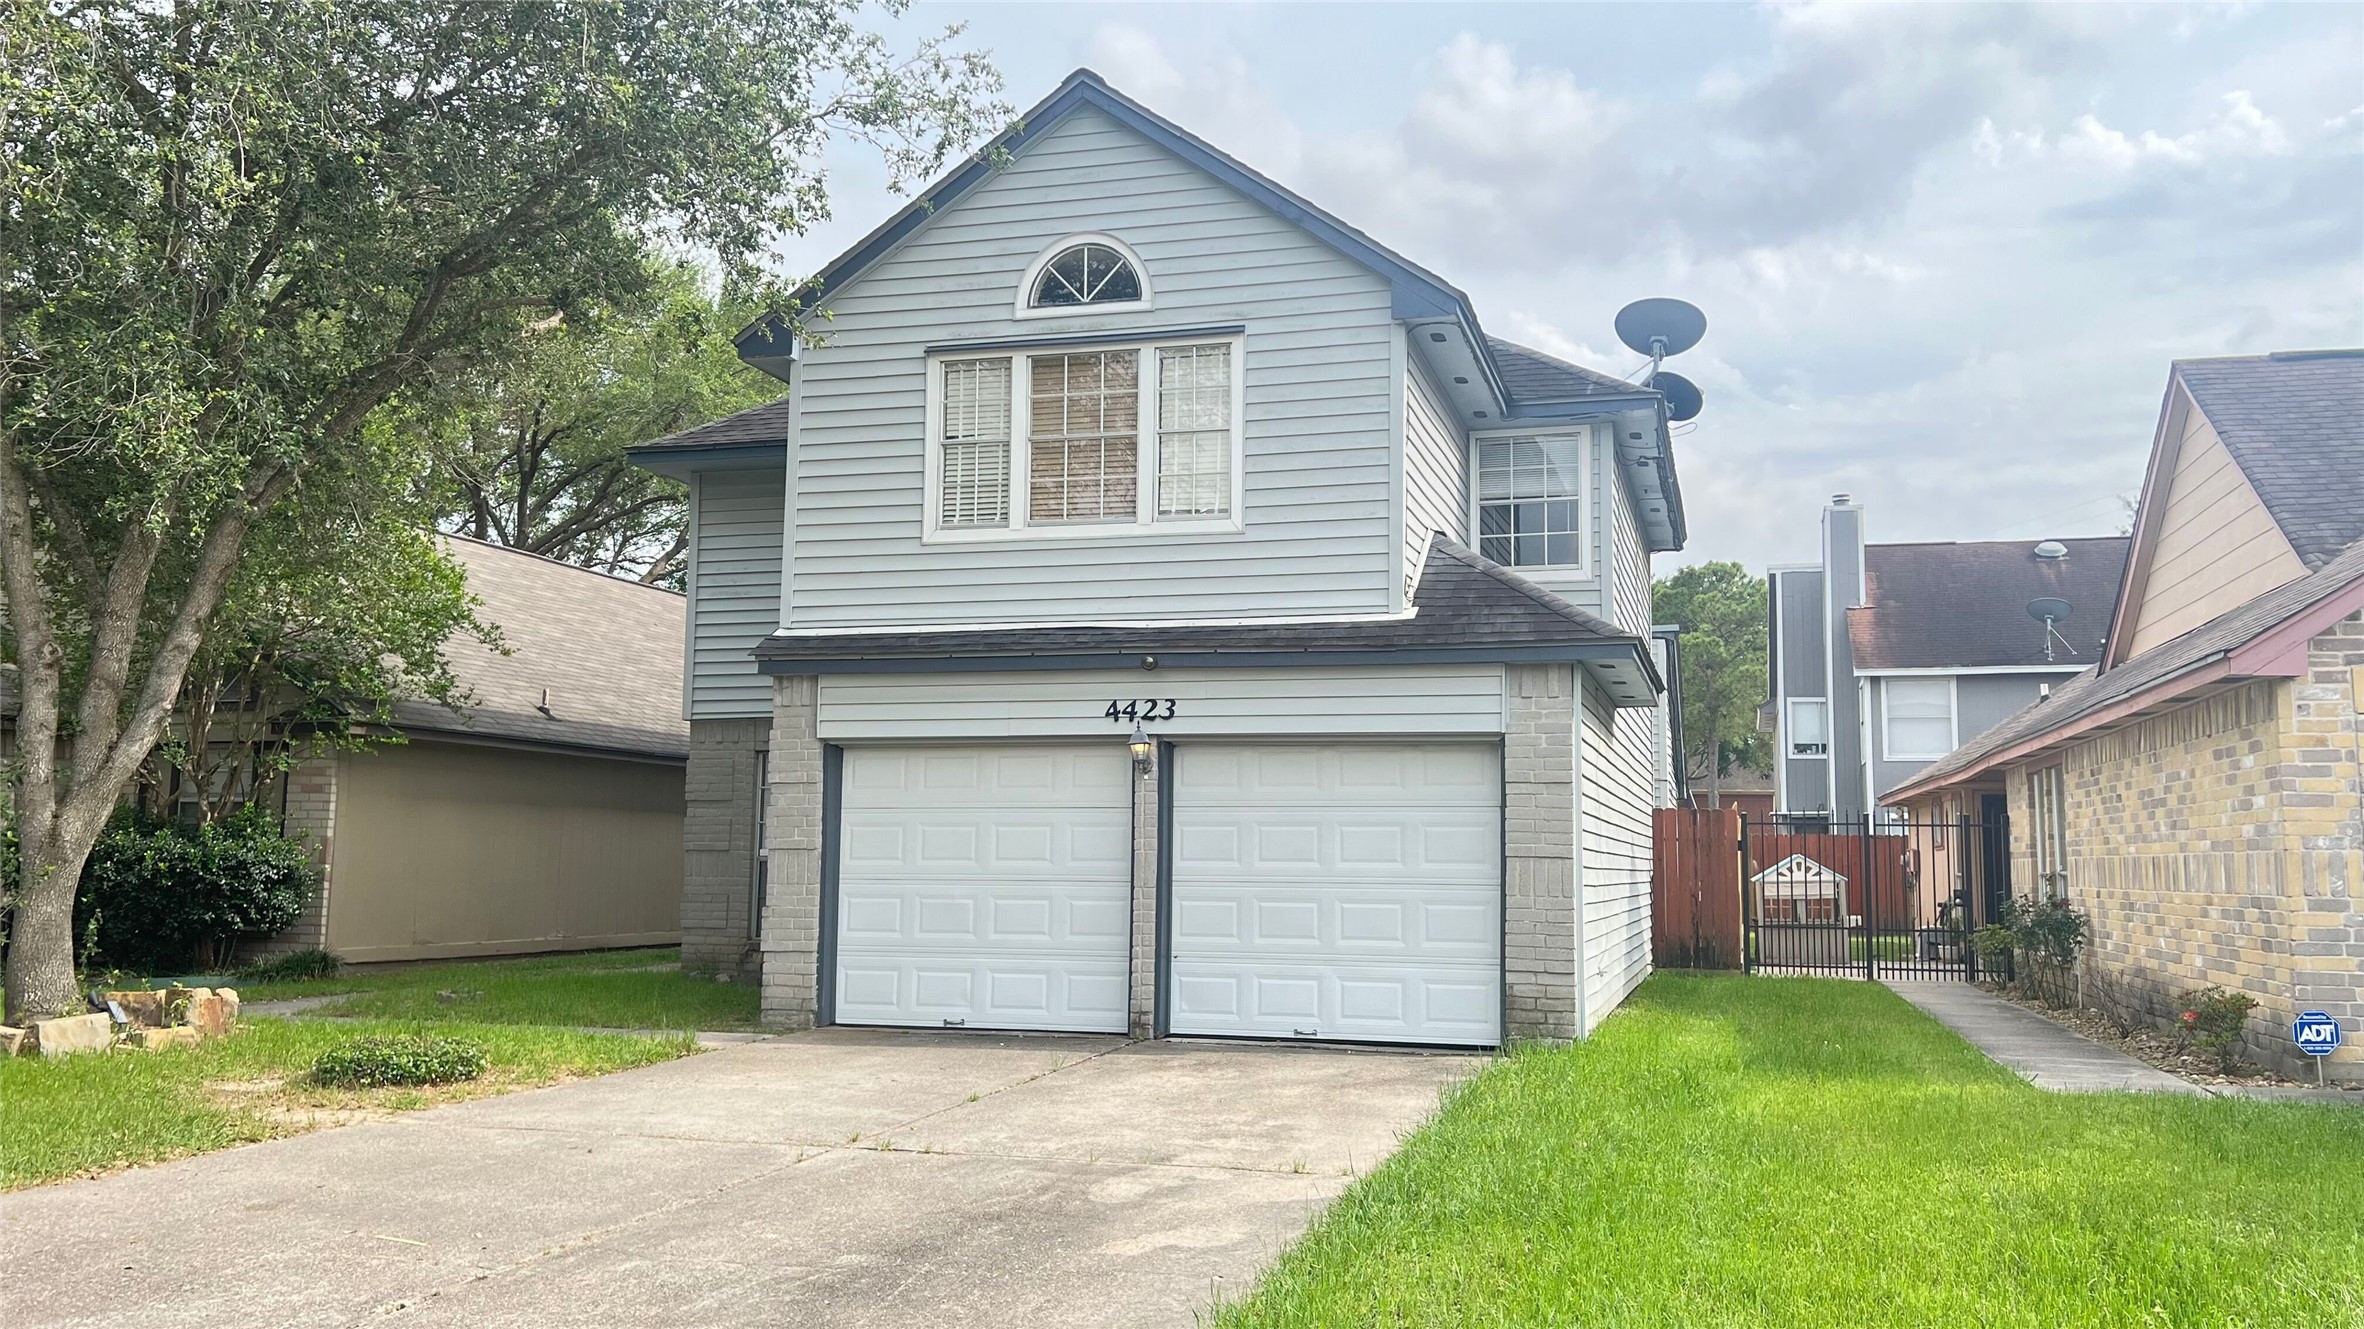 Houston 2-story, 4-bed 4423 Tracemeadow Drive-idx